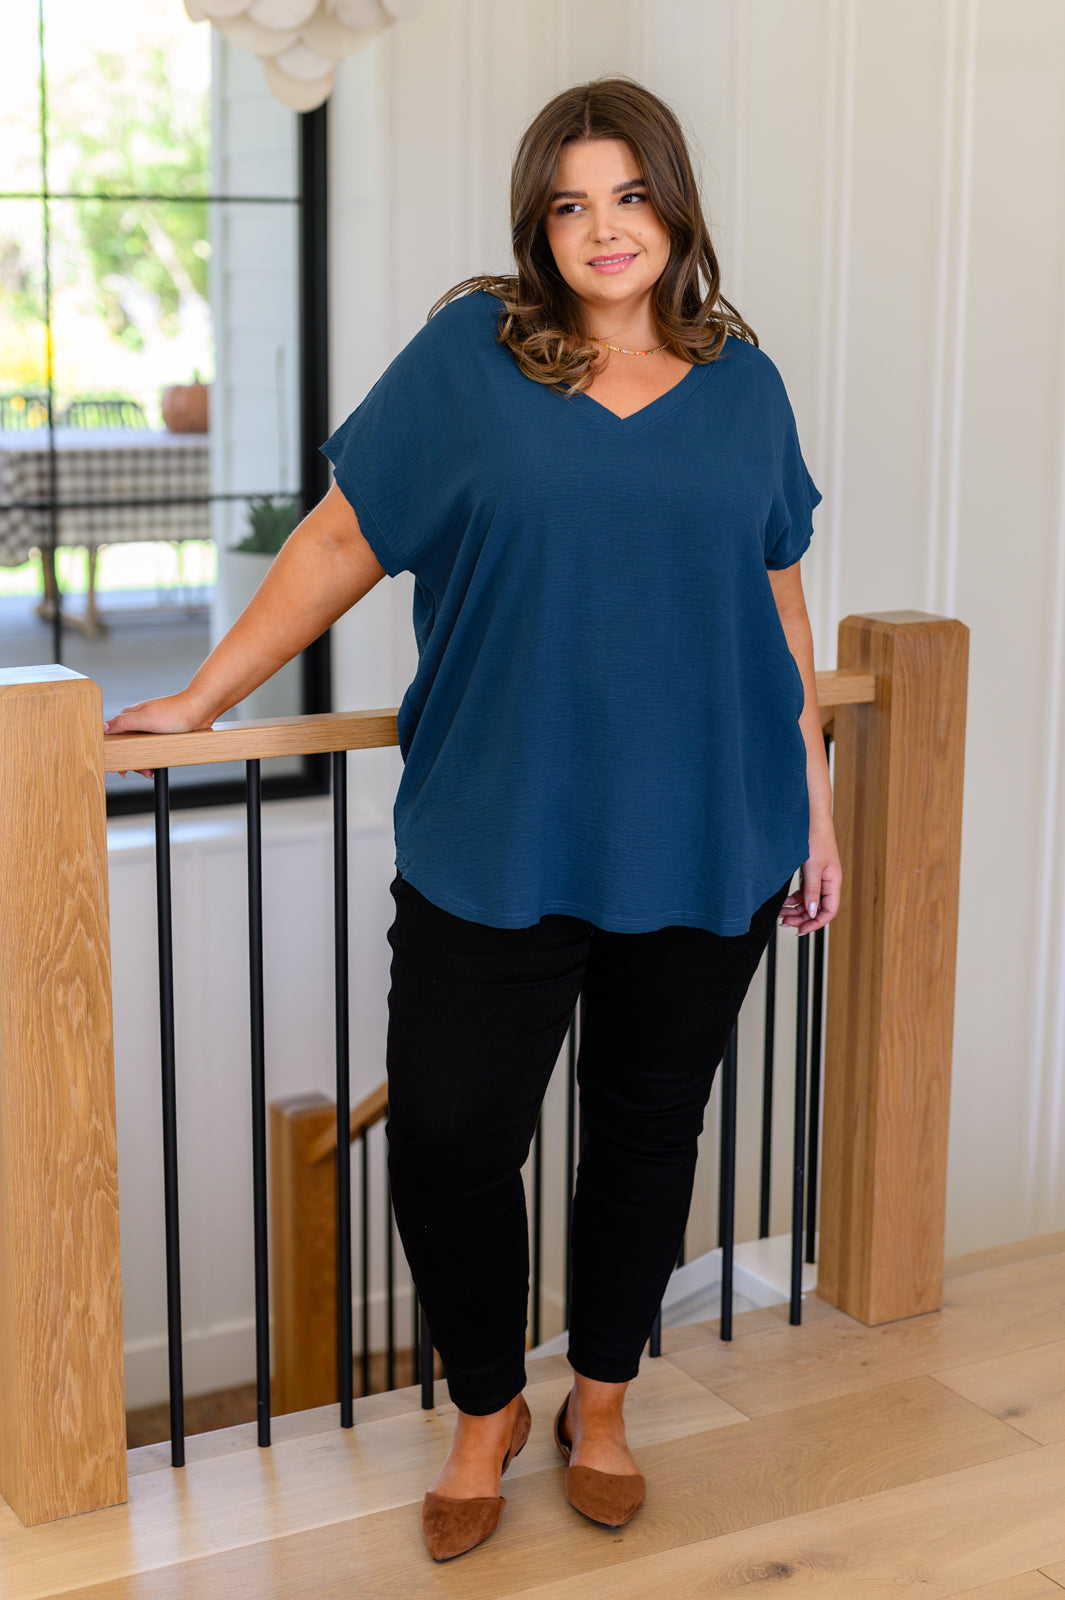 Very Much Needed V-Neck Top in Teal - Southern Divas Boutique